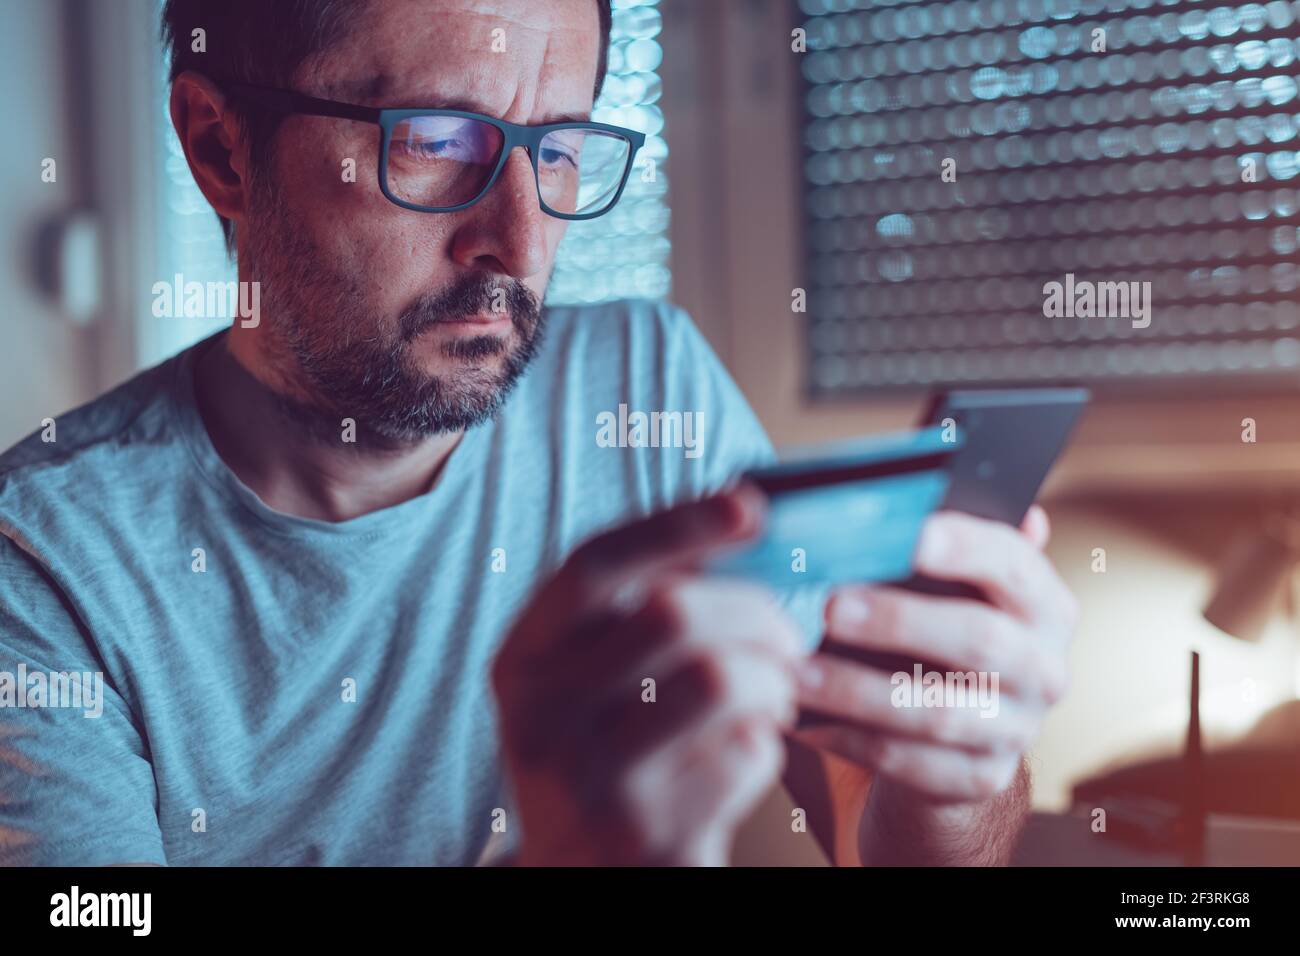 Online shopping security concern, man buying over internet with mobile smart phone and credit card, close up with selective focus Stock Photo